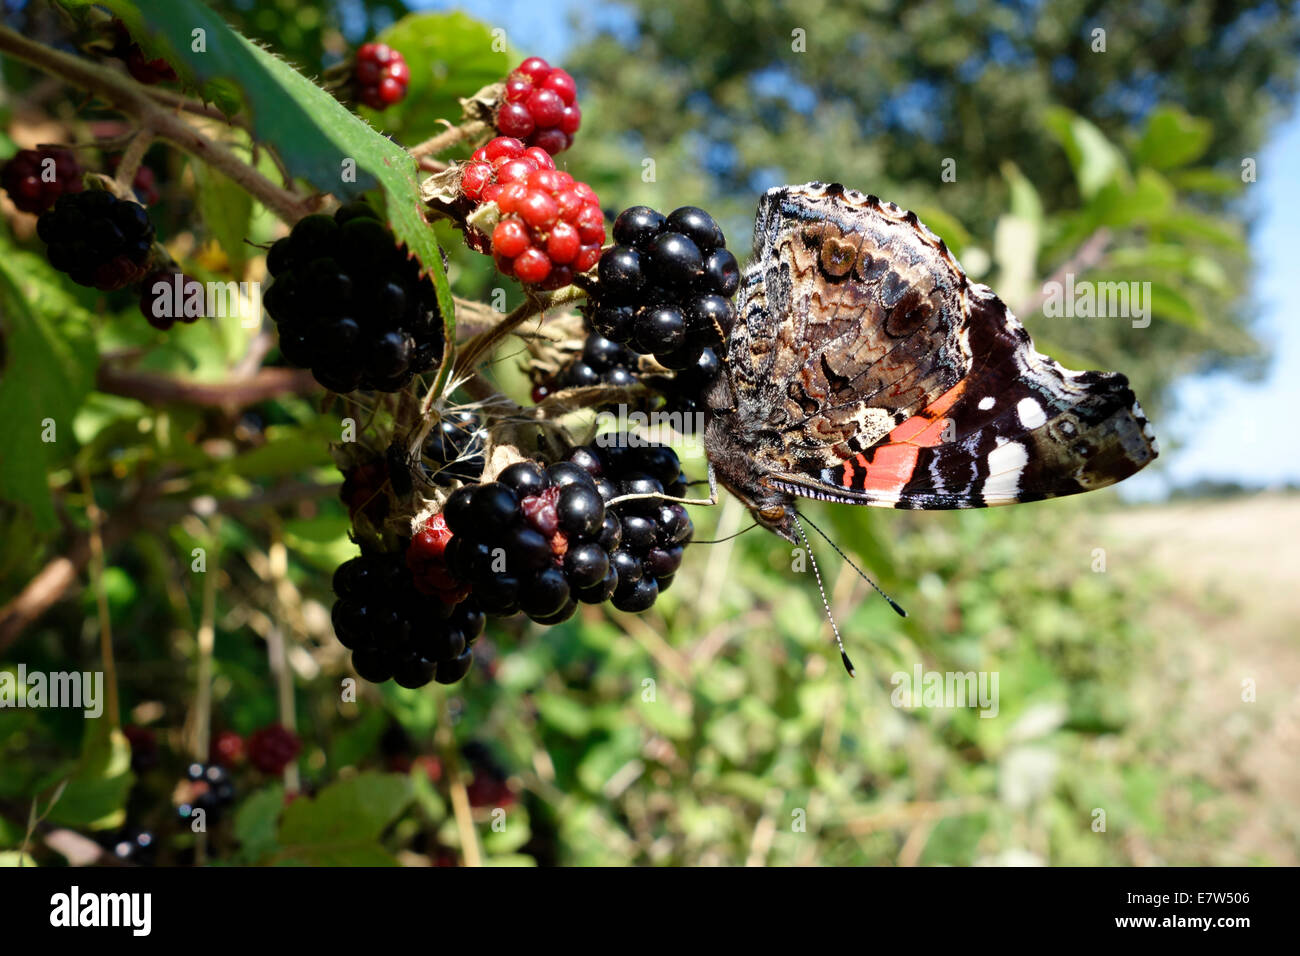 A red admiral butterfly (Vanessa atalanta) feeding on blackberries in a hedgerow Stock Photo